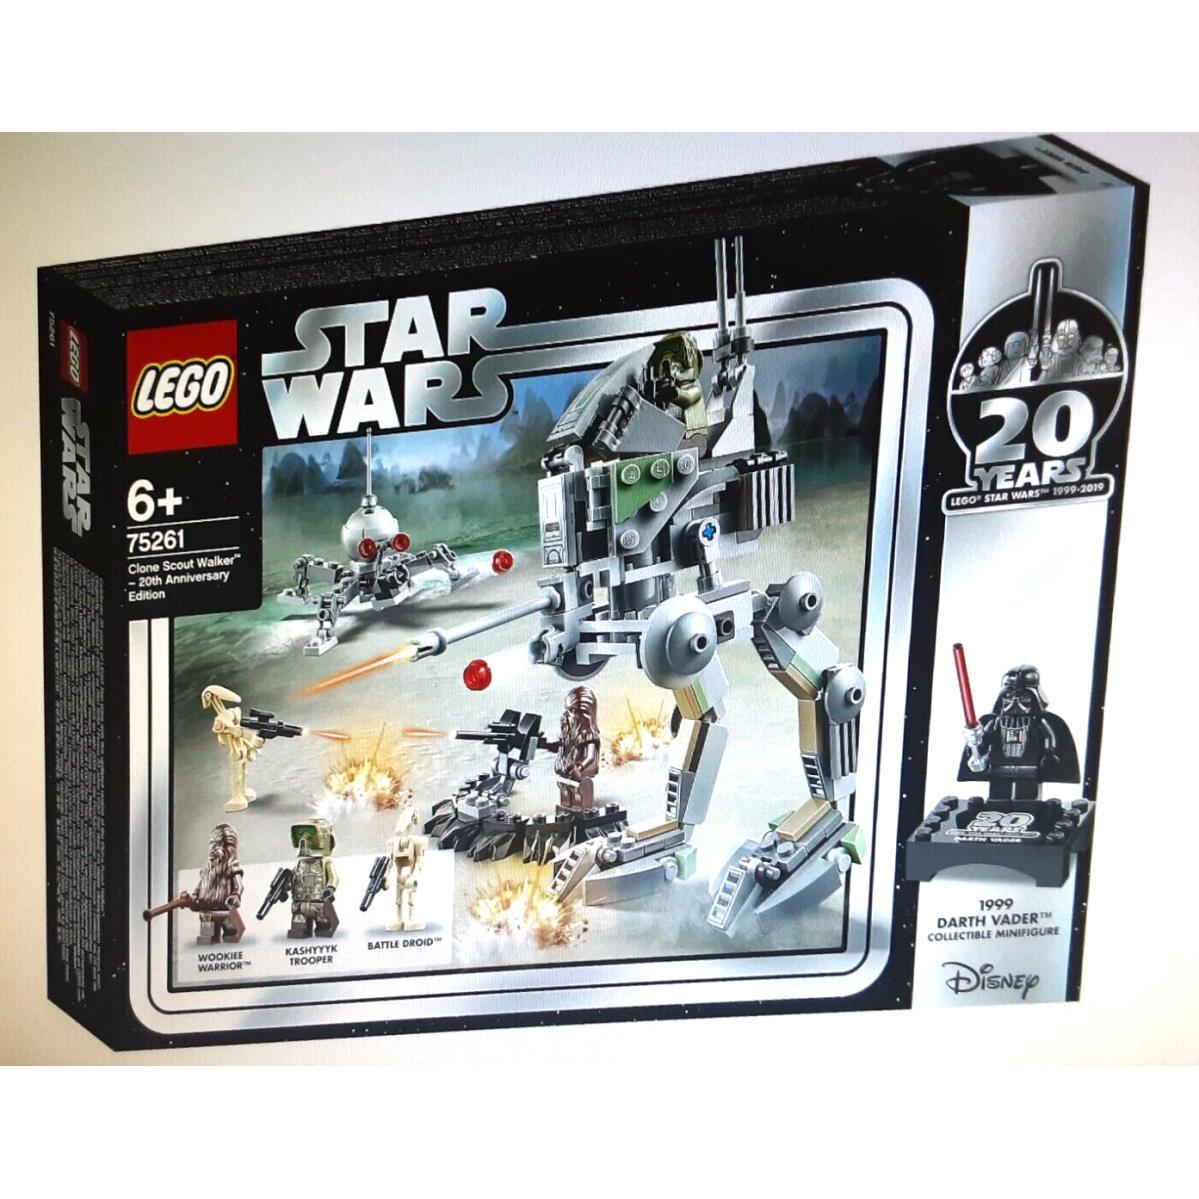 Lego Star Wars 75261 Scout Walker 20th Anniversary Edition